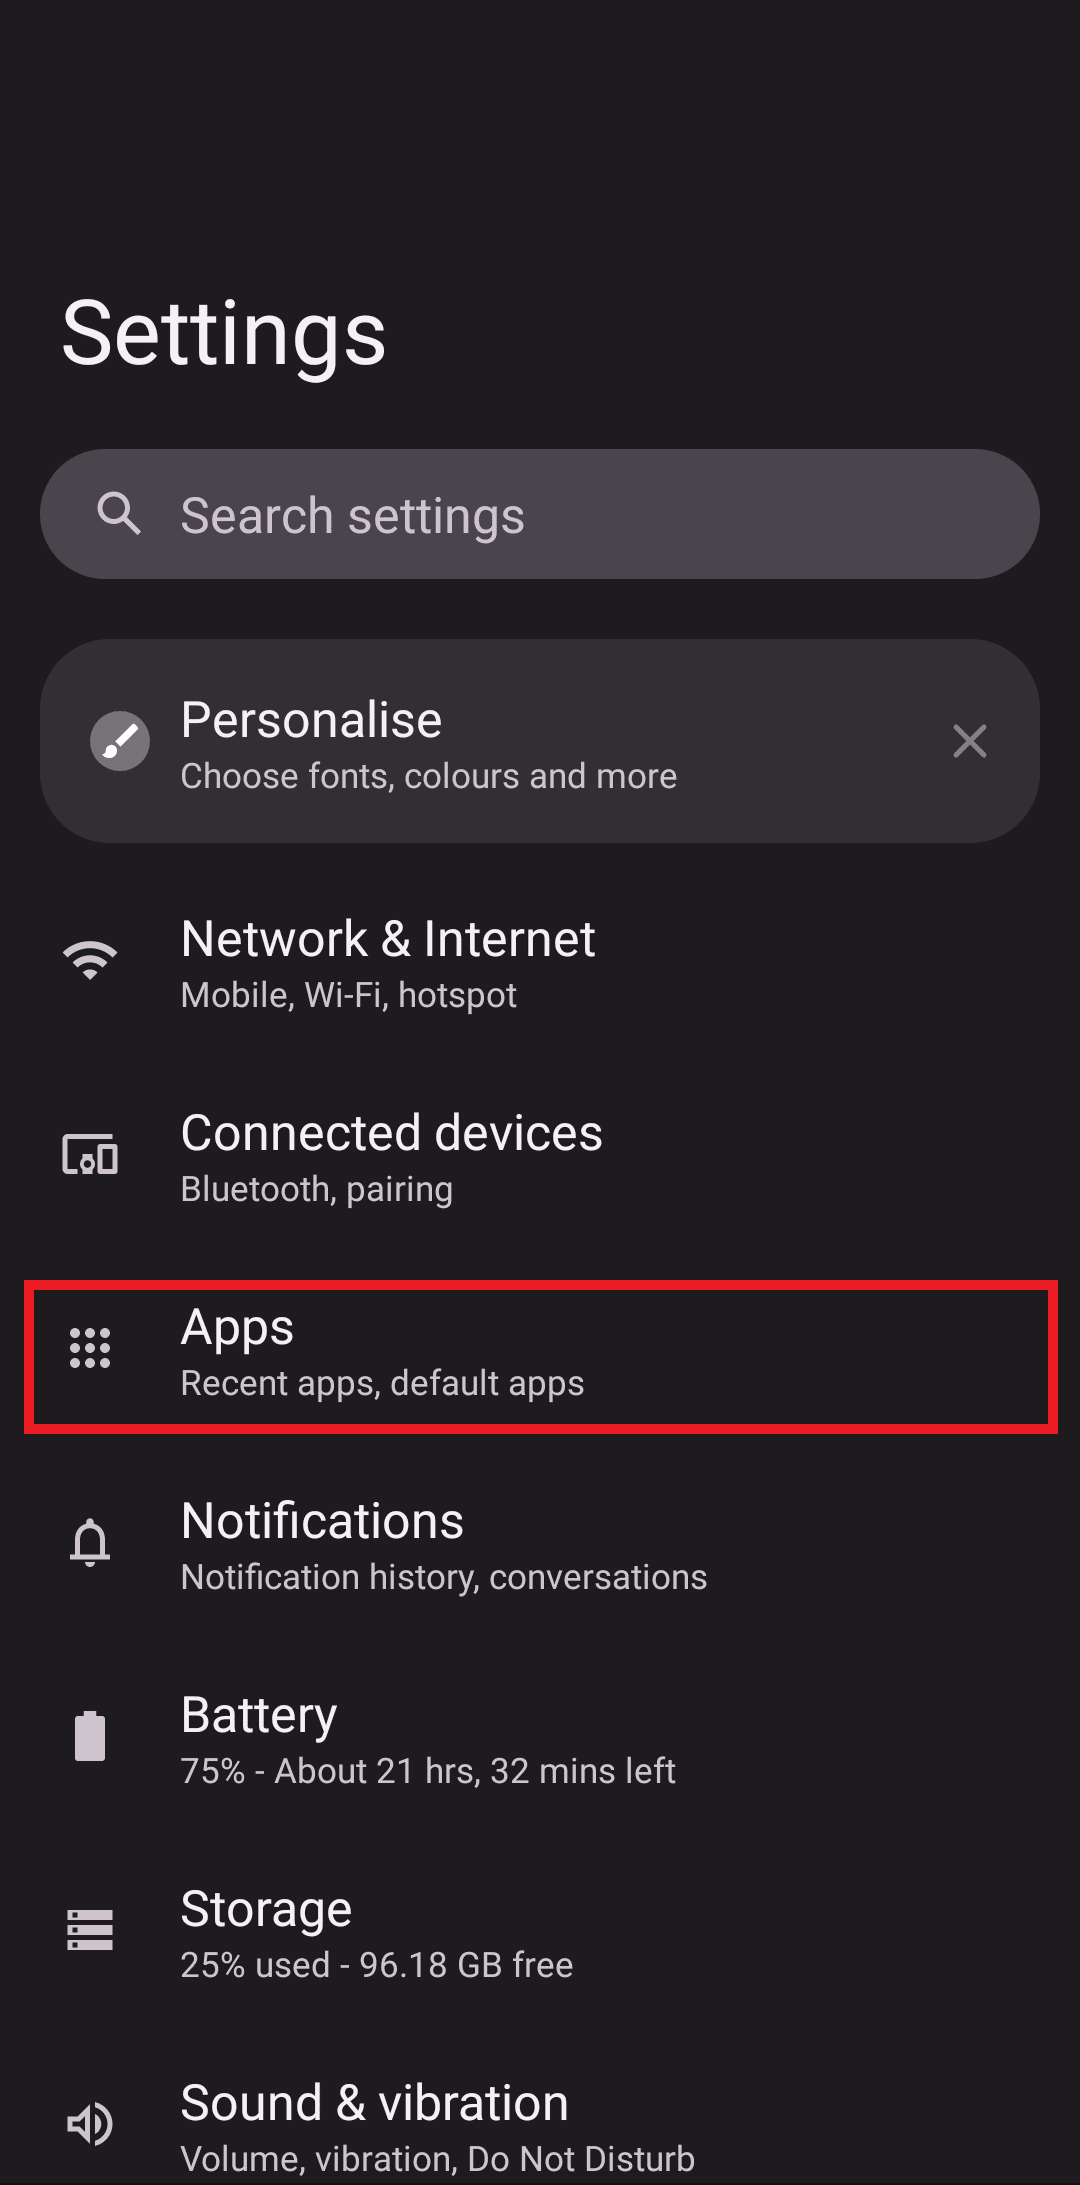 Open Settings and tap on Apps